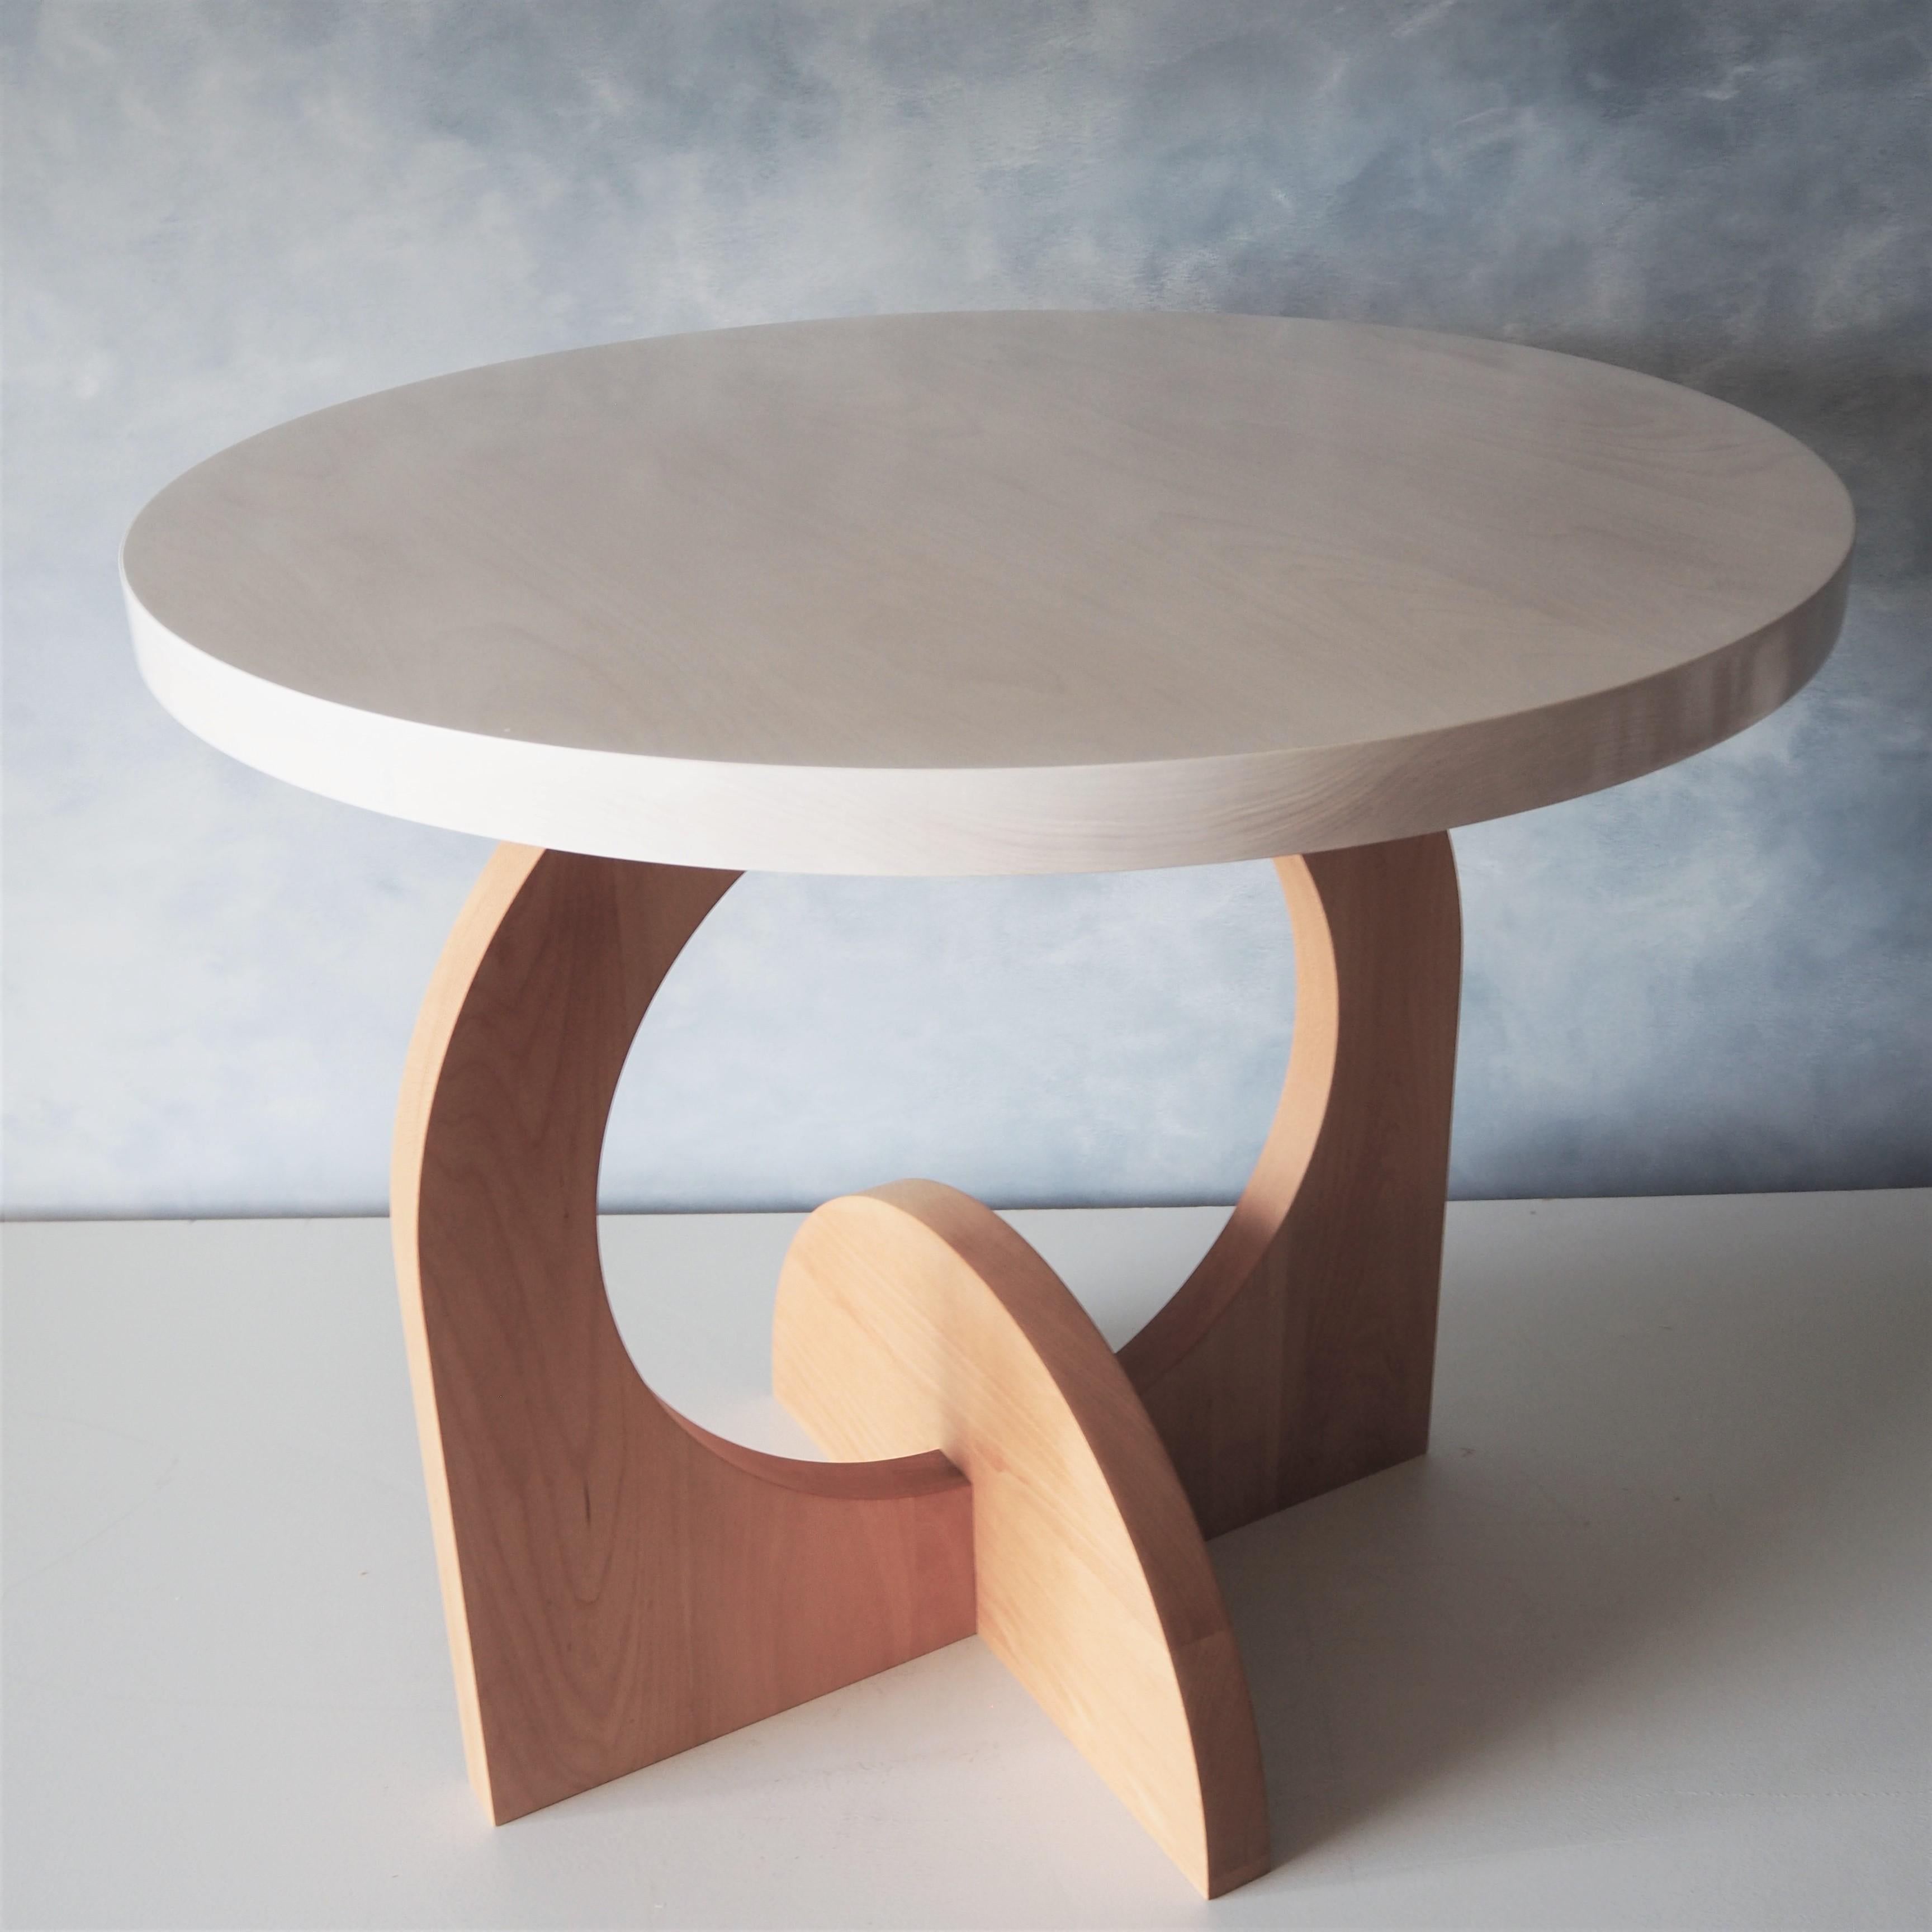 Contemporary White and Beech Round Crescent Dining Table by MSJ Furniture Studio